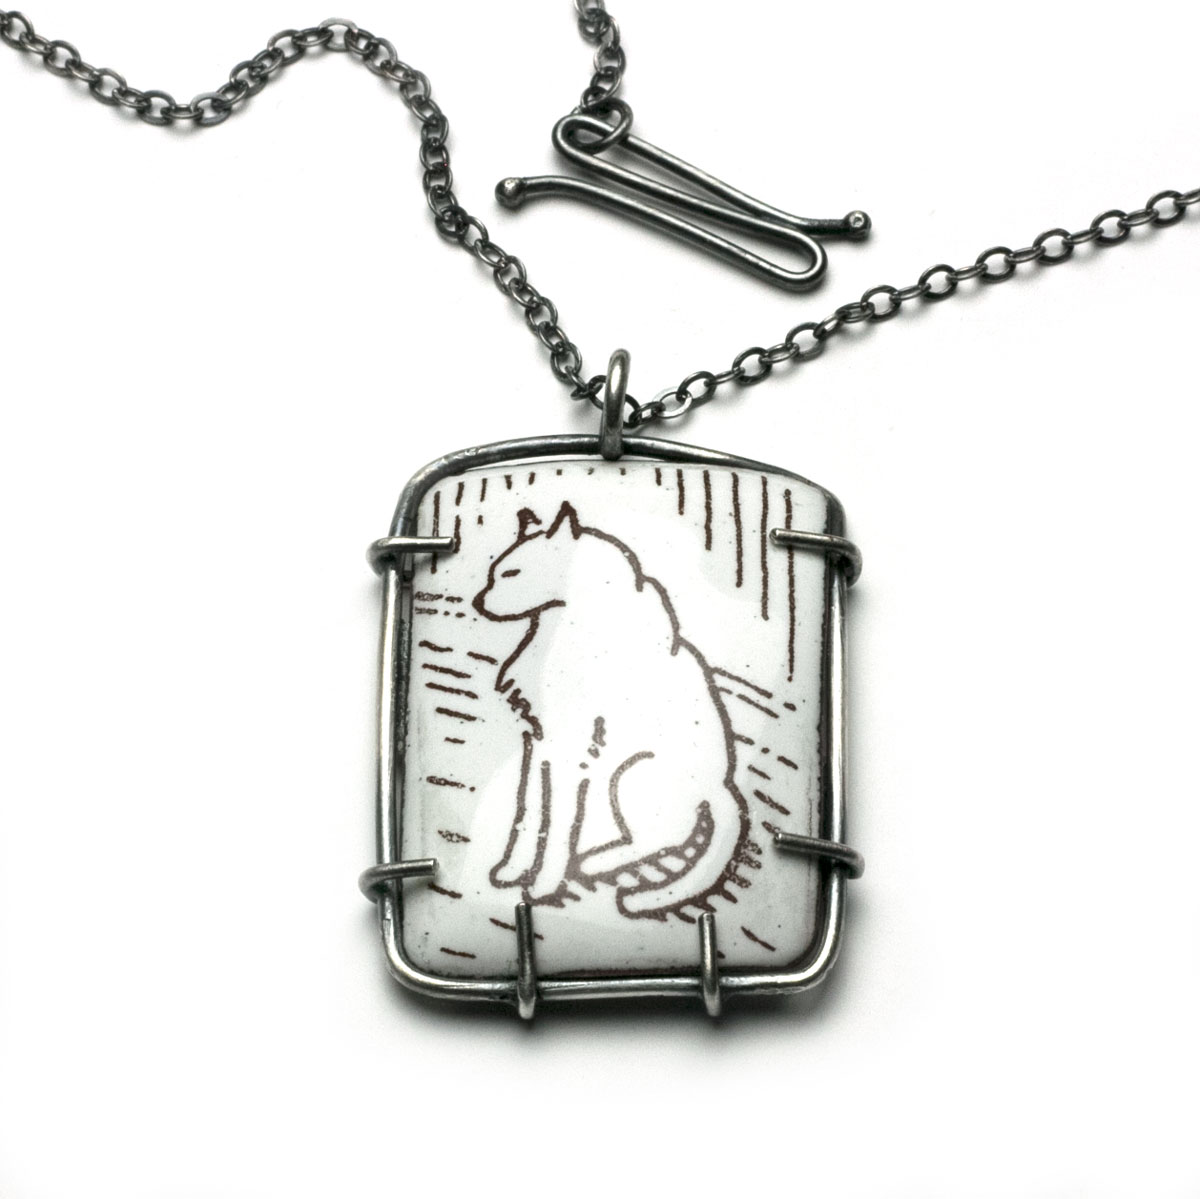 Kitty Necklace Vertical in enamel and sterling silver patinaed necklace